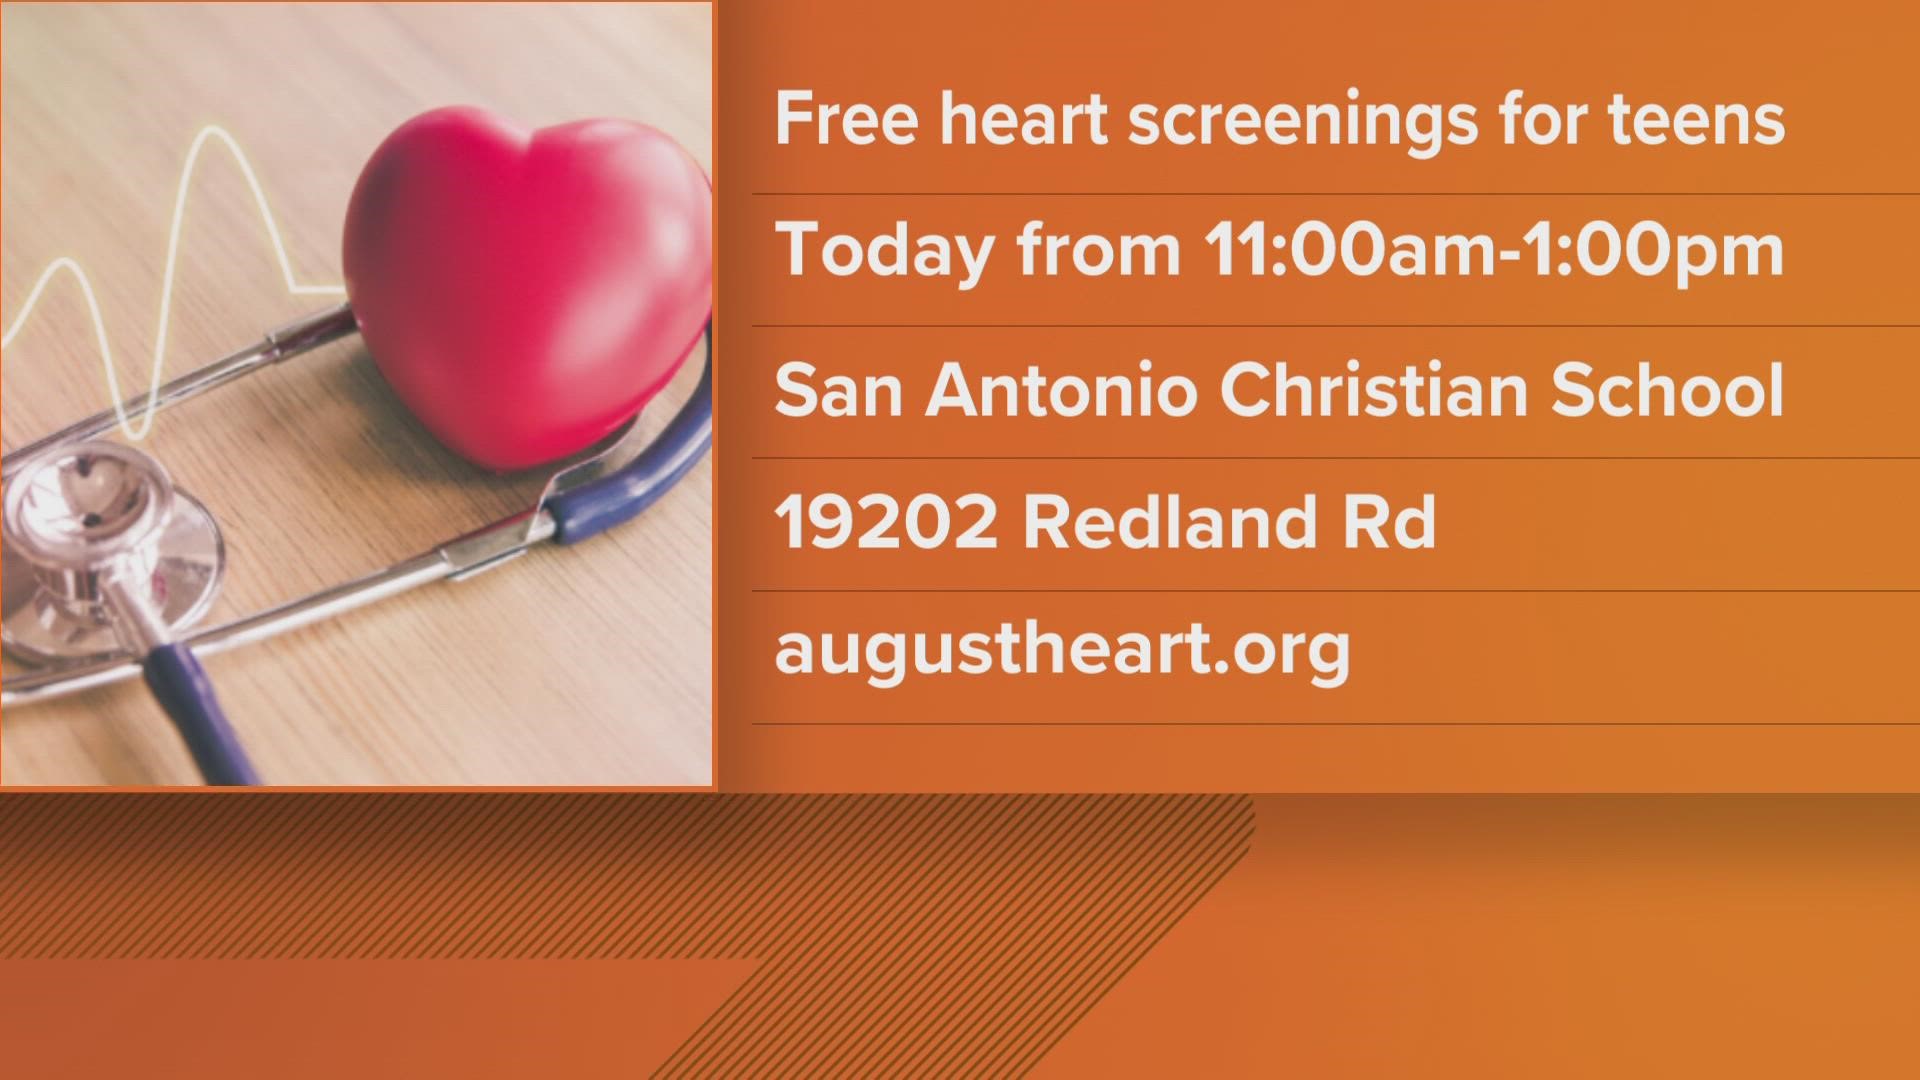 The heart screening will be taking place from 11 a.m. - 1 p.m.